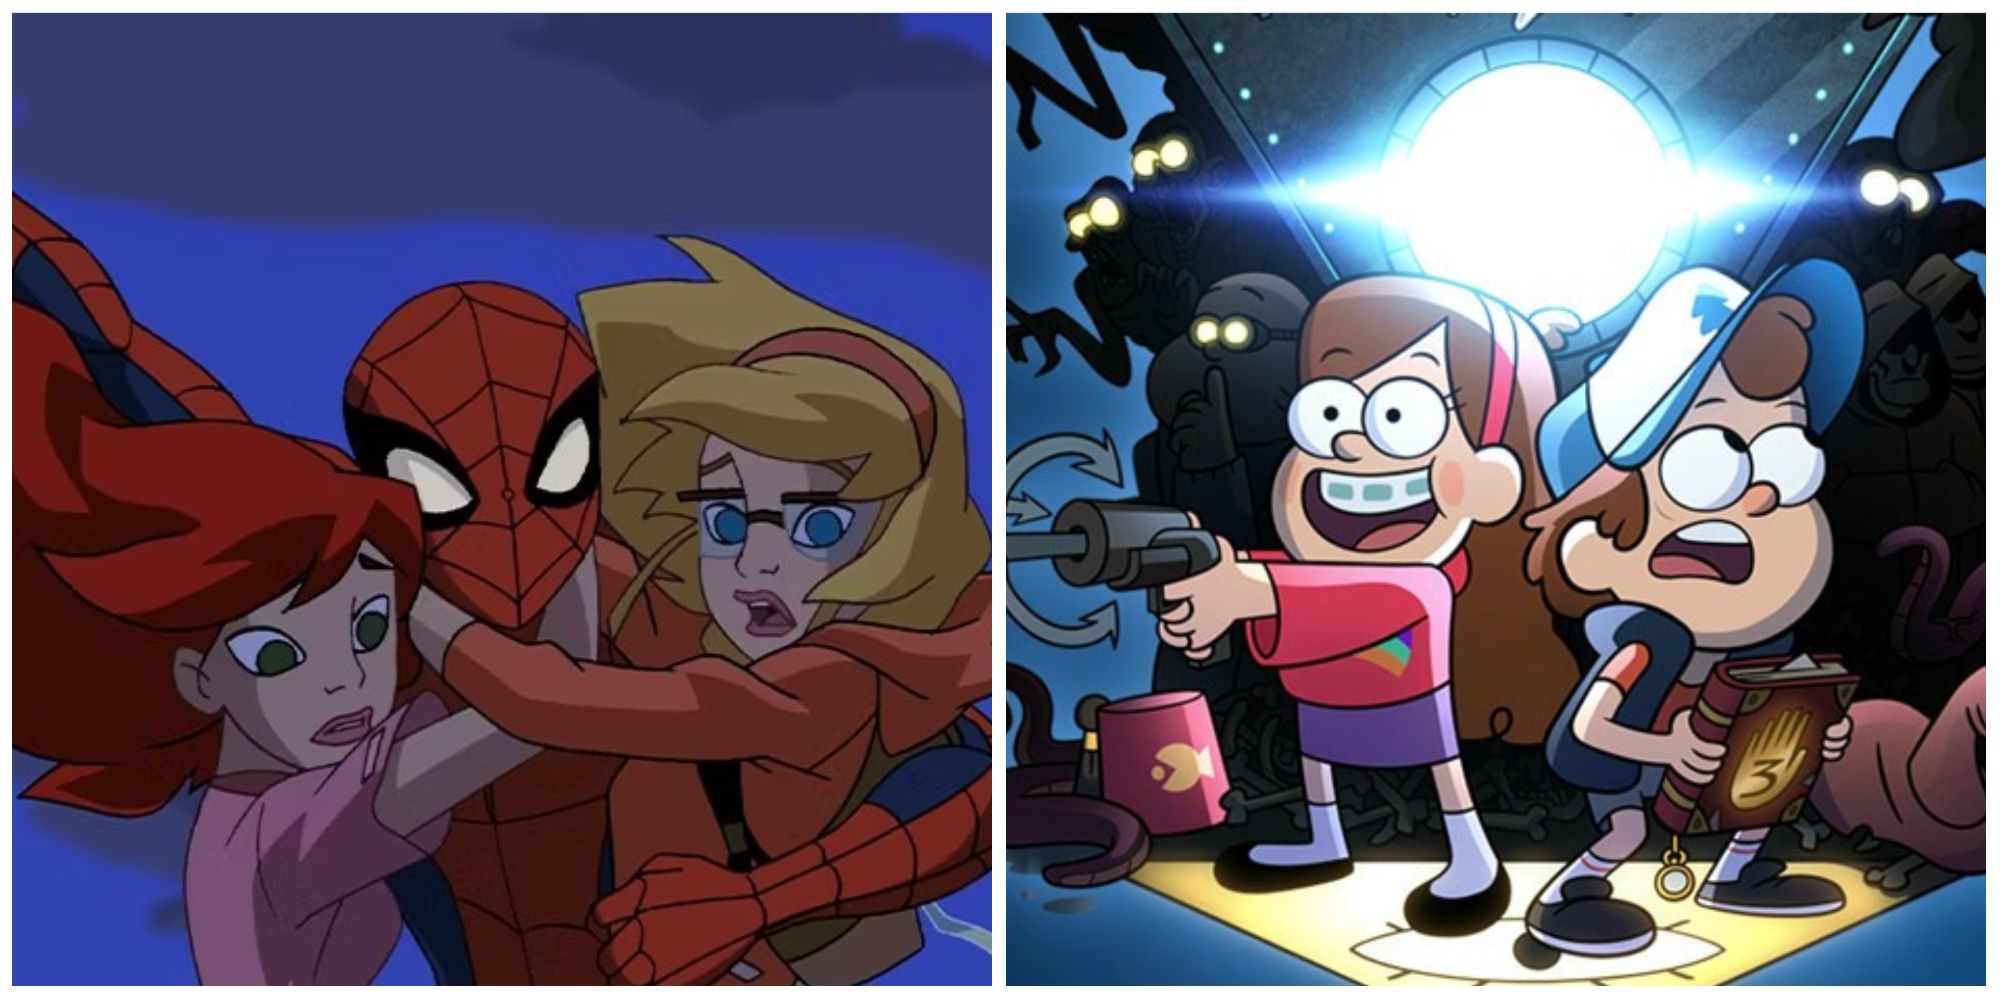 The titular hero in The Spectacular Spider-Man and Dipper and Mabel in Gravity Falls